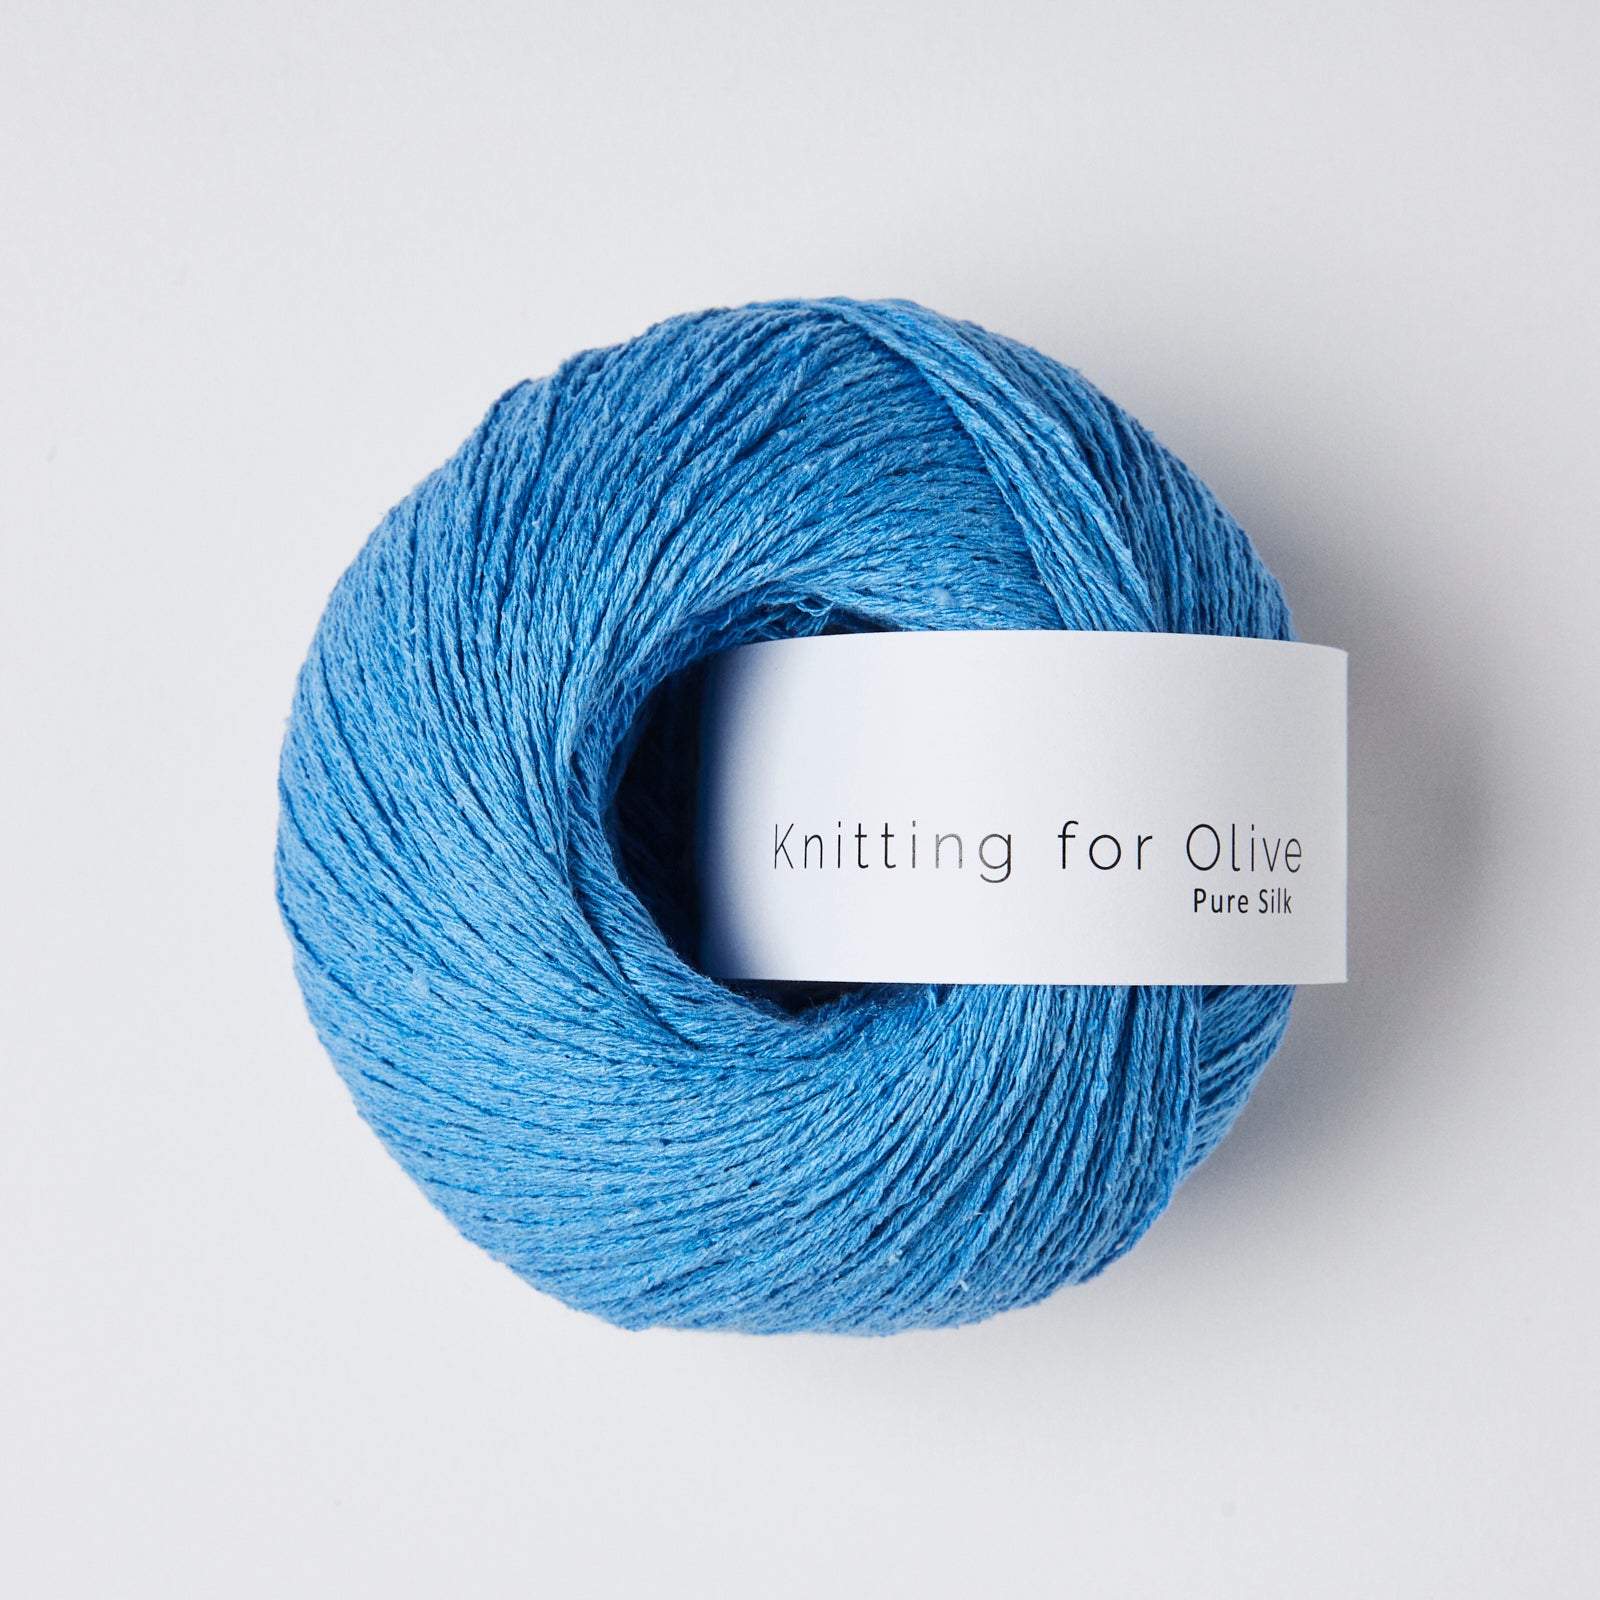 Knitting for Olive Pure Silk - Poppy Blue